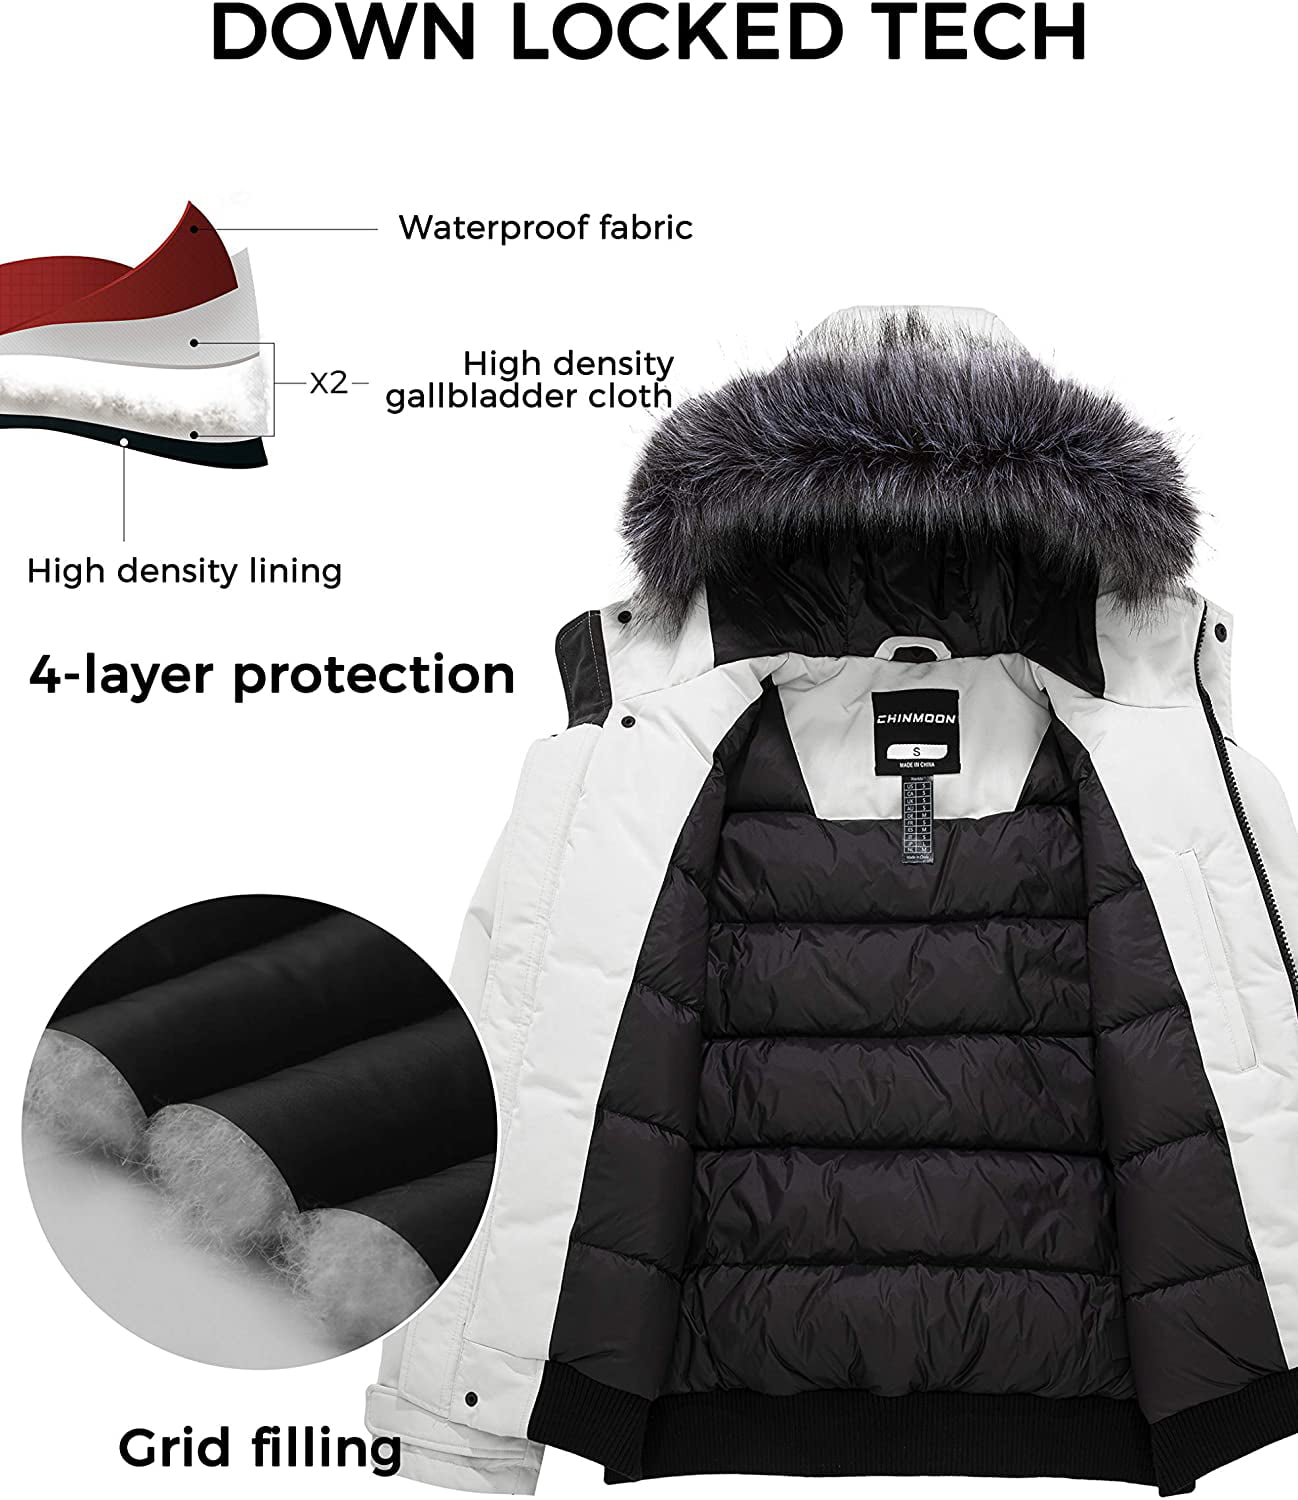 CHIN·MOON Men's RDS Down Jacket Waterproof Puffer Coat Thickened Winter Parka Jacket with Fur Hood